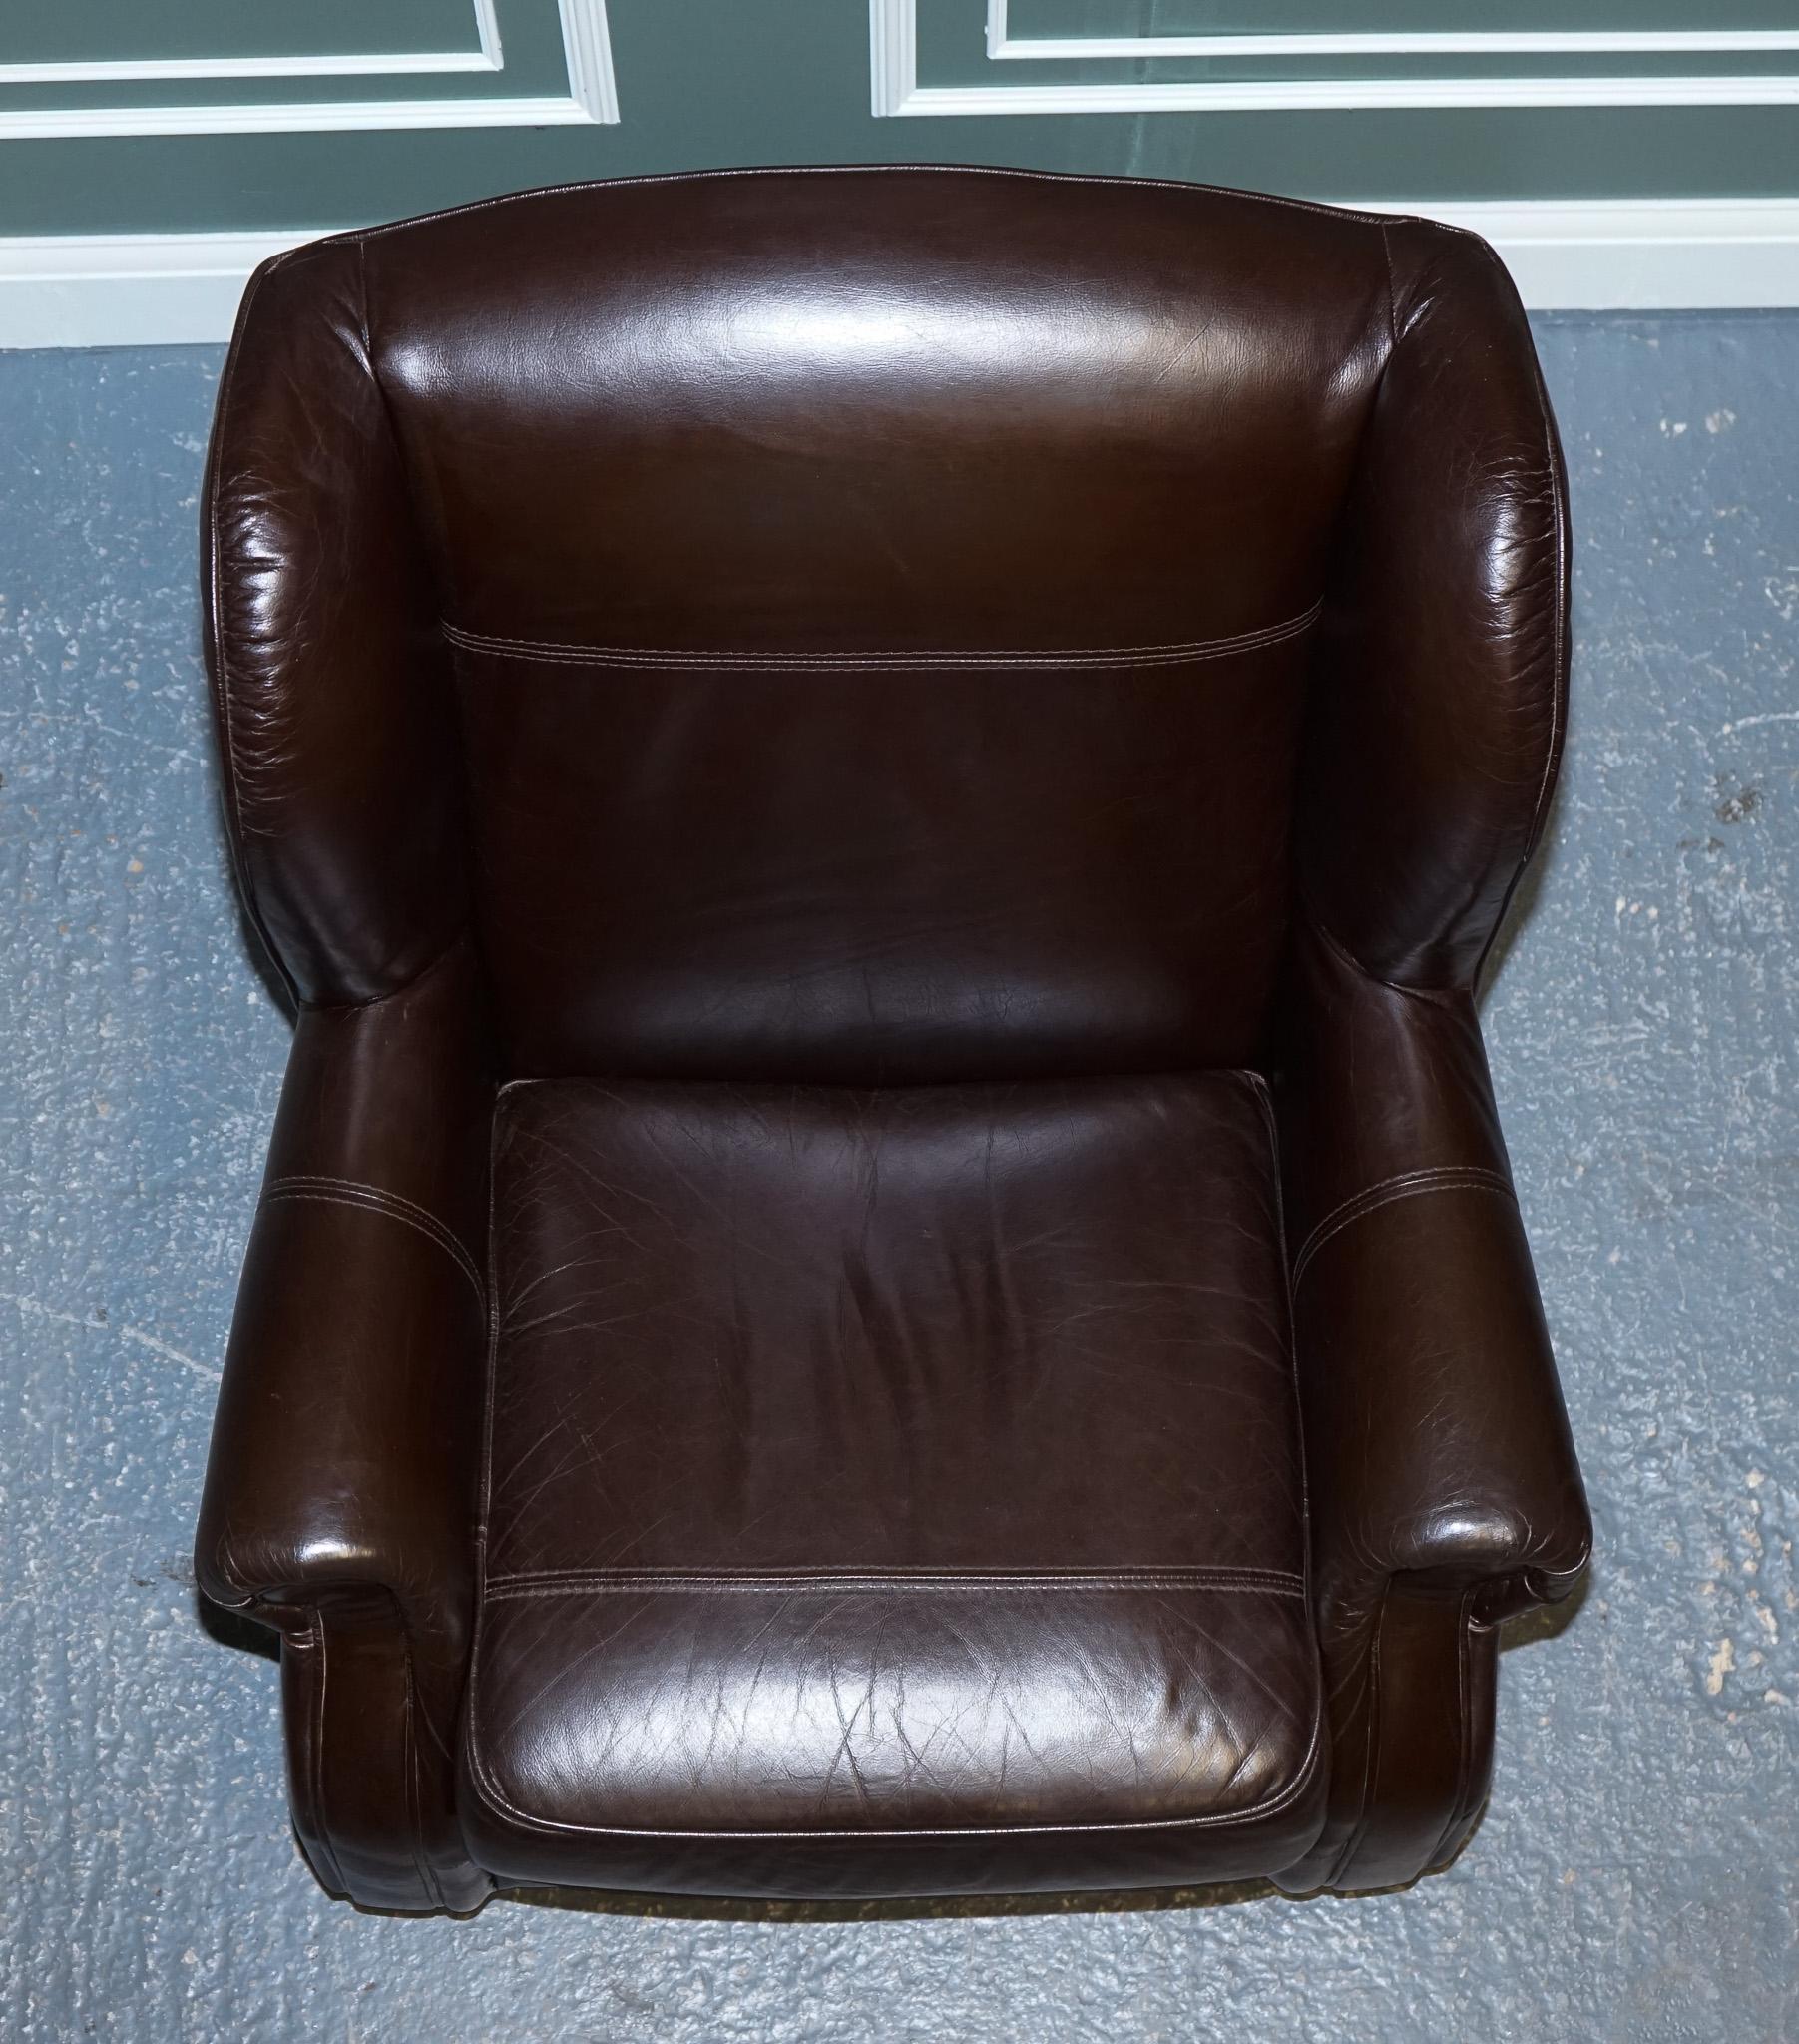 ViNTAGE PAIR OF CHOCOLATE BROWN LEATHER WINGBACK CHAIRS For Sale 5